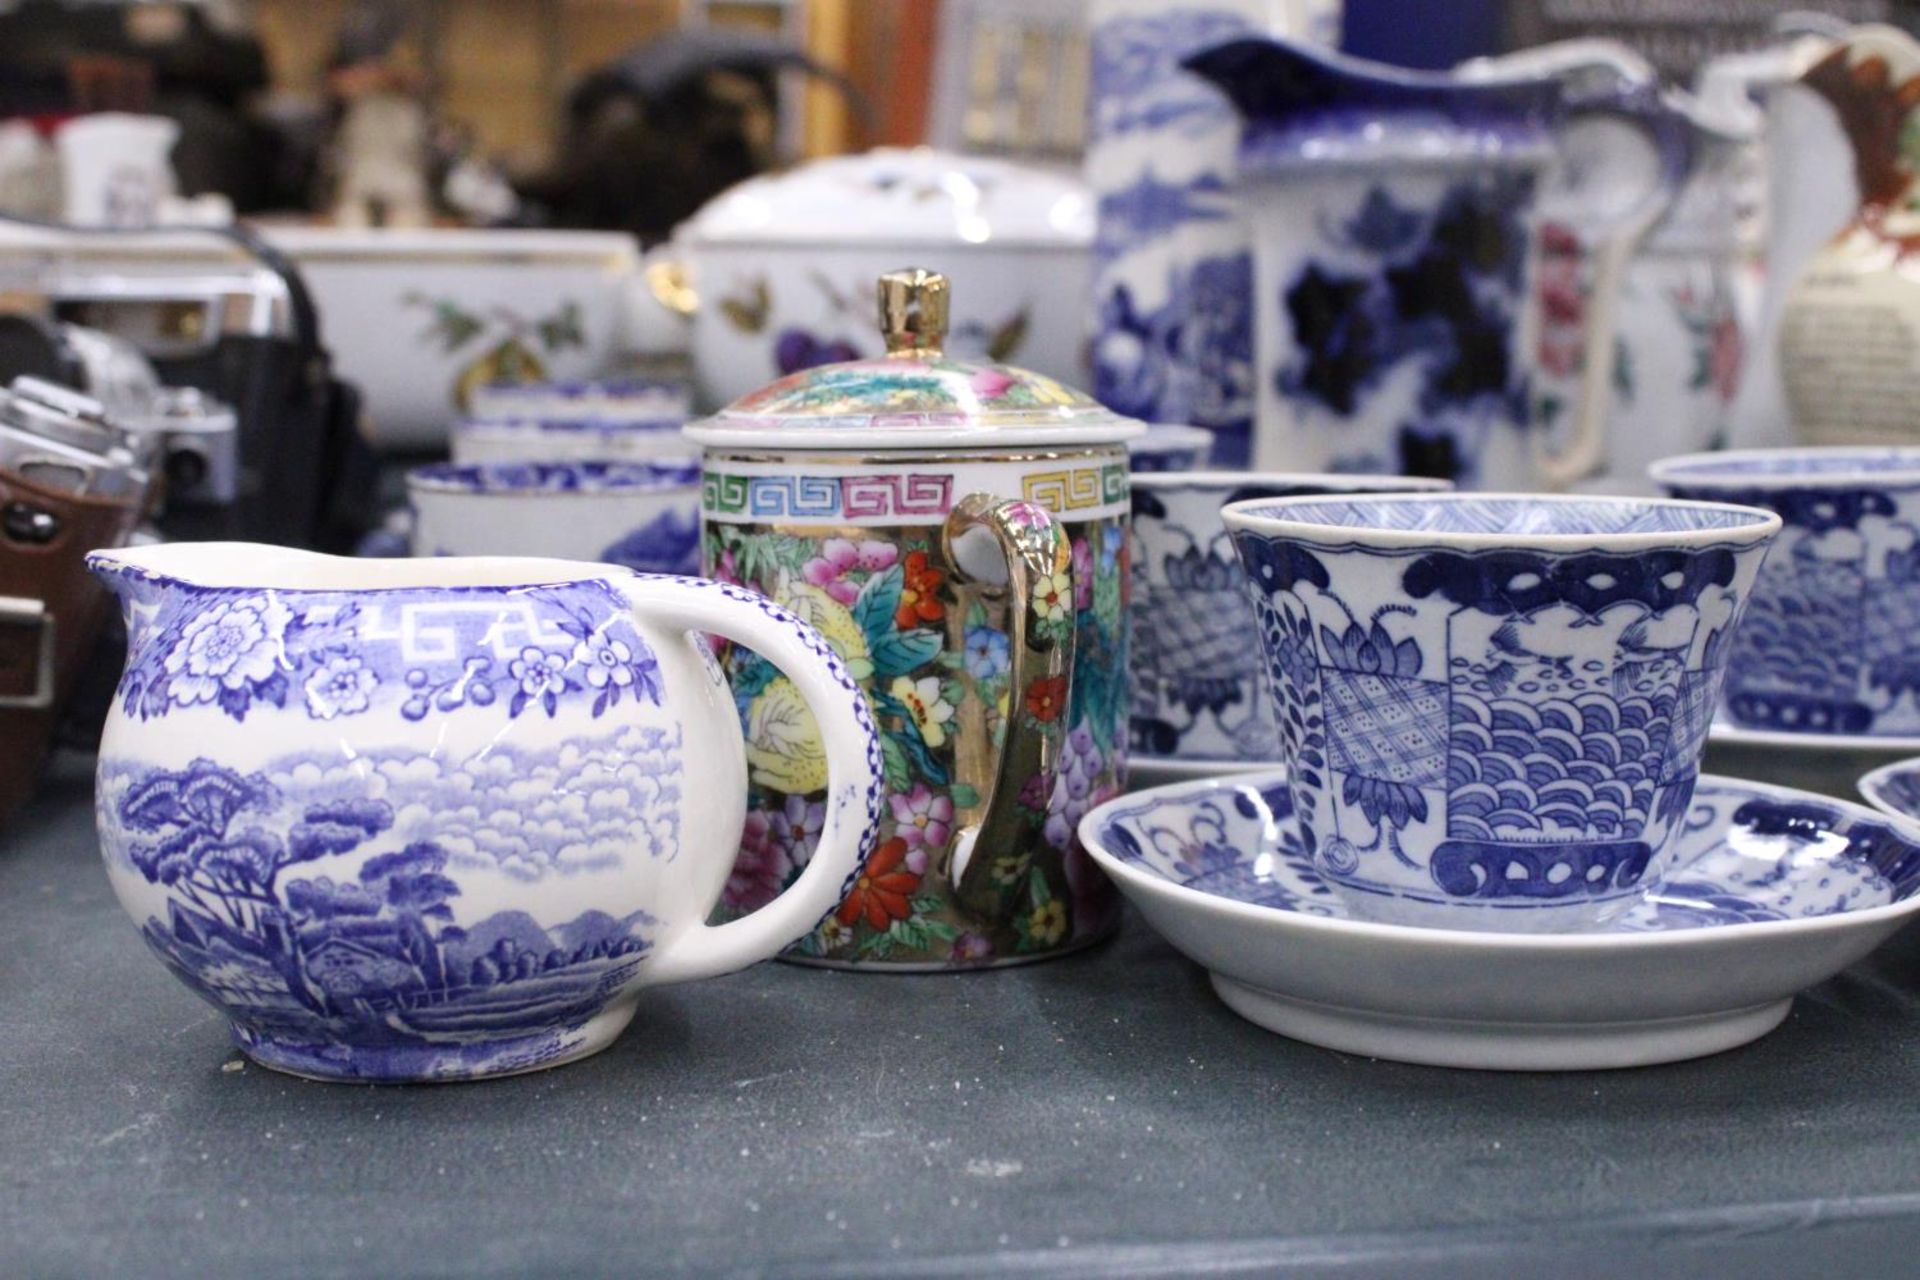 A LARGE QUANTITY OF ORIENTAL STYLE BLUE AND WHITE TO INCLUDE CUPS,SAUCERS,SIDE PLATES PLUS A JUG AND - Image 5 of 6